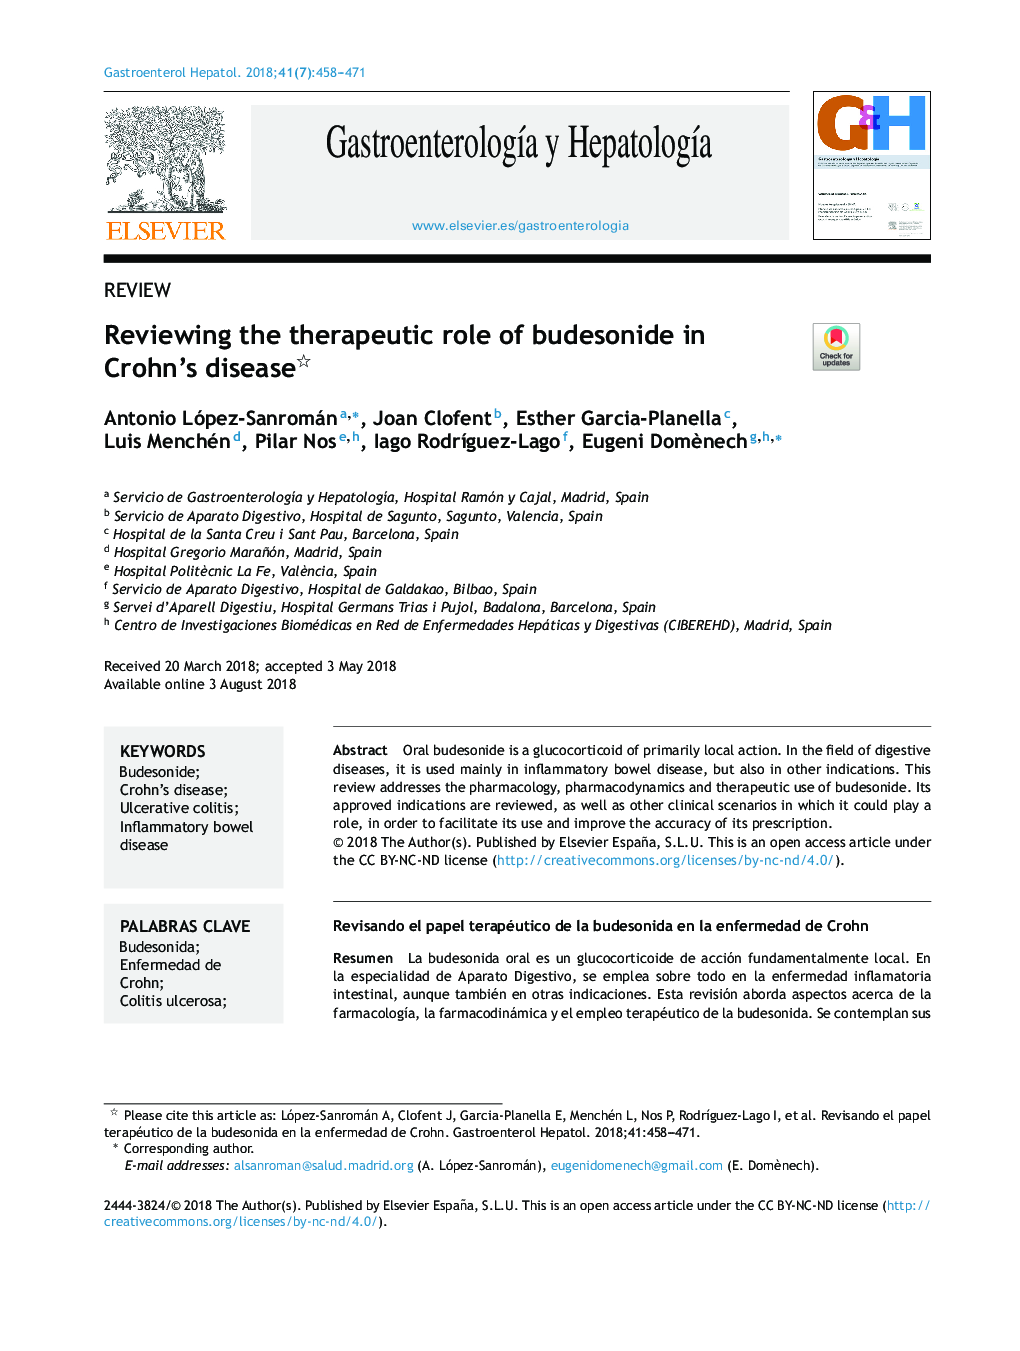 Reviewing the therapeutic role of budesonide in Crohn's disease